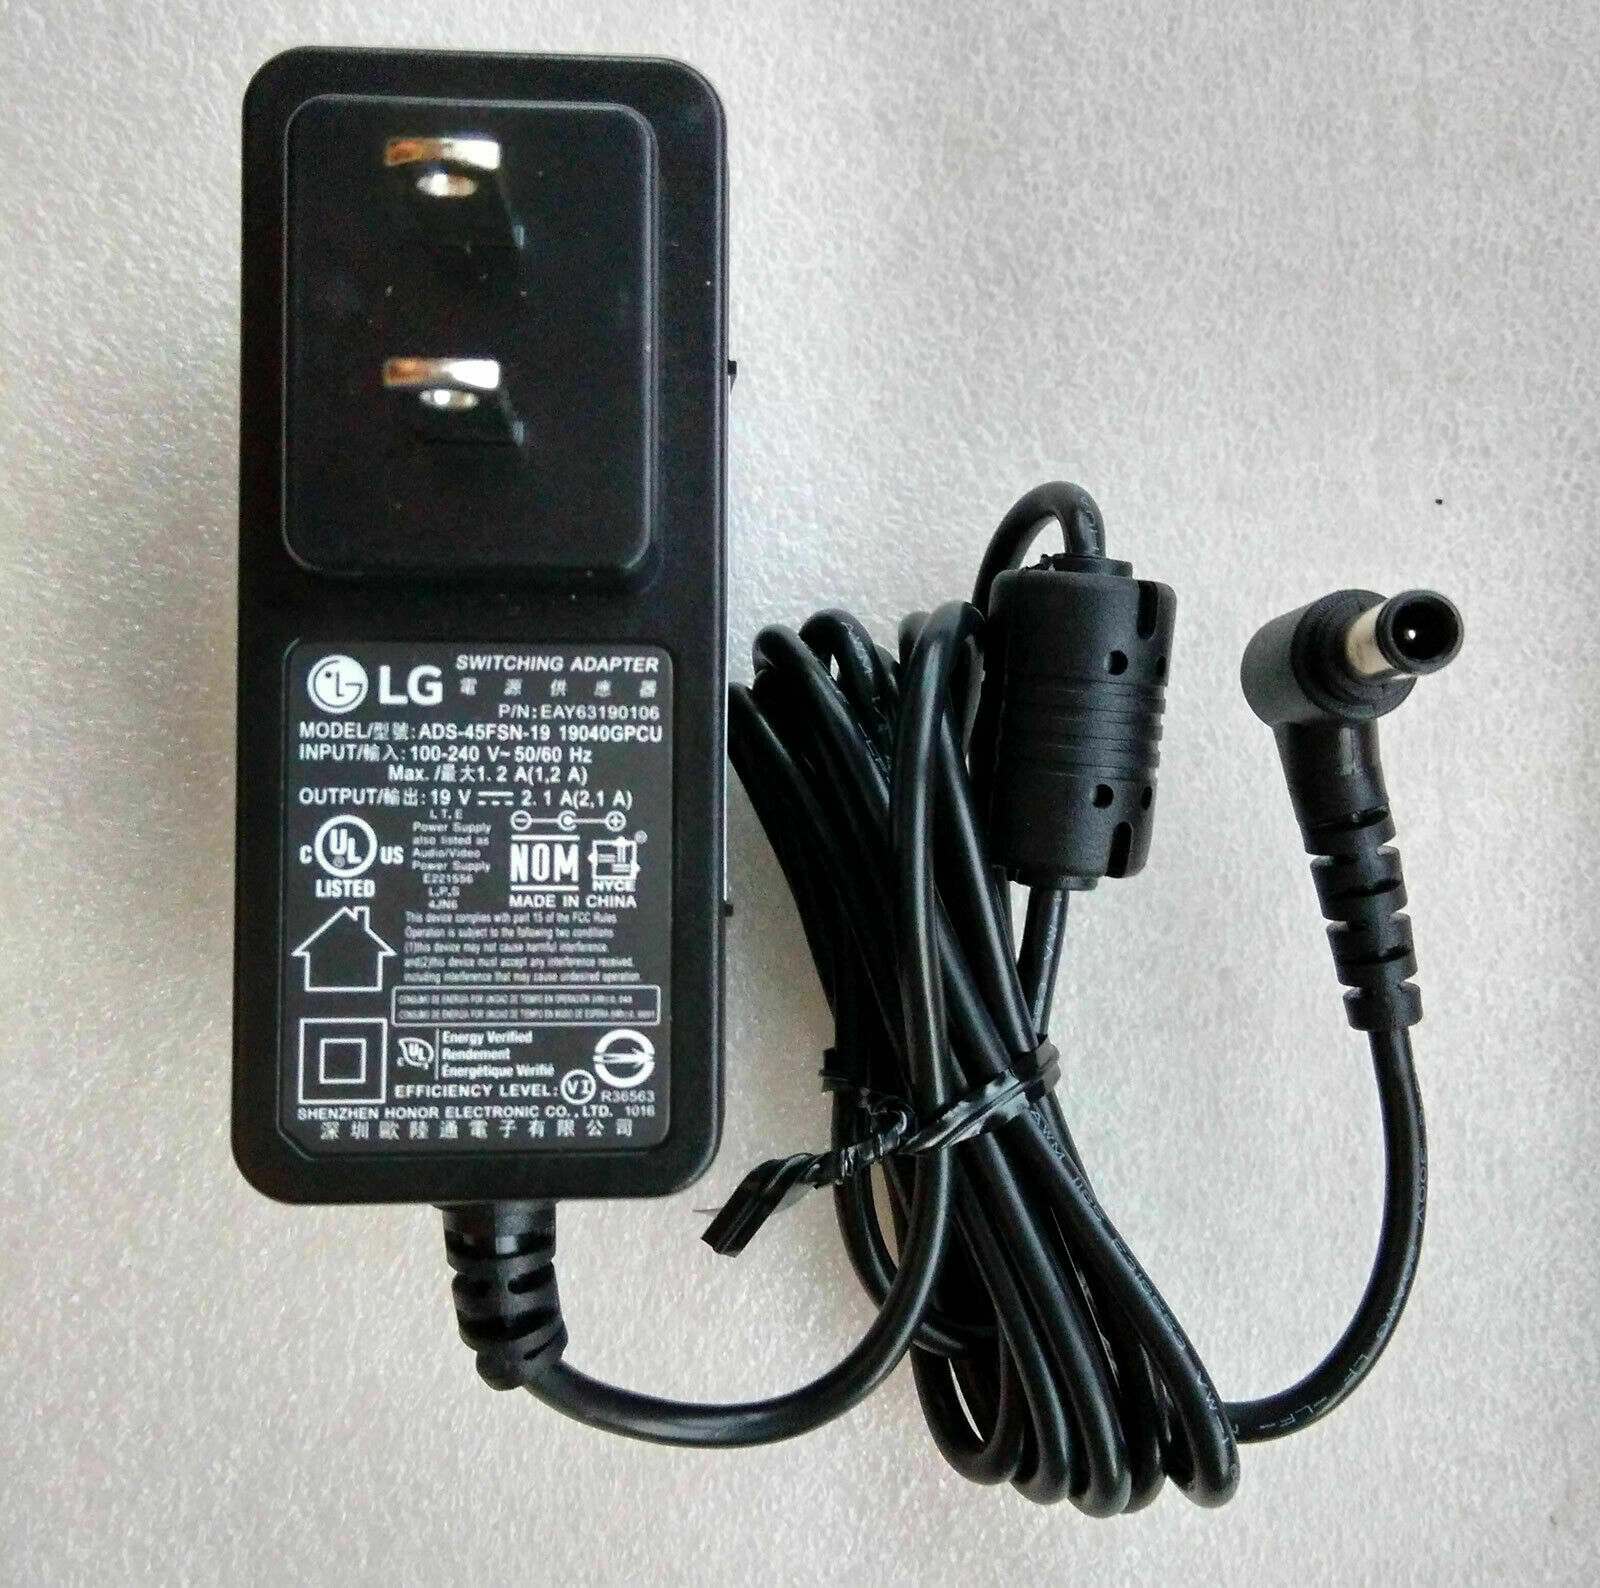 LG AC Adapter 4 34WL85C-B 34BL85C-B LED Monitor Power Supply Cord Charger Adapter for for: LG AC Adapter 4 34WL85C-B 3